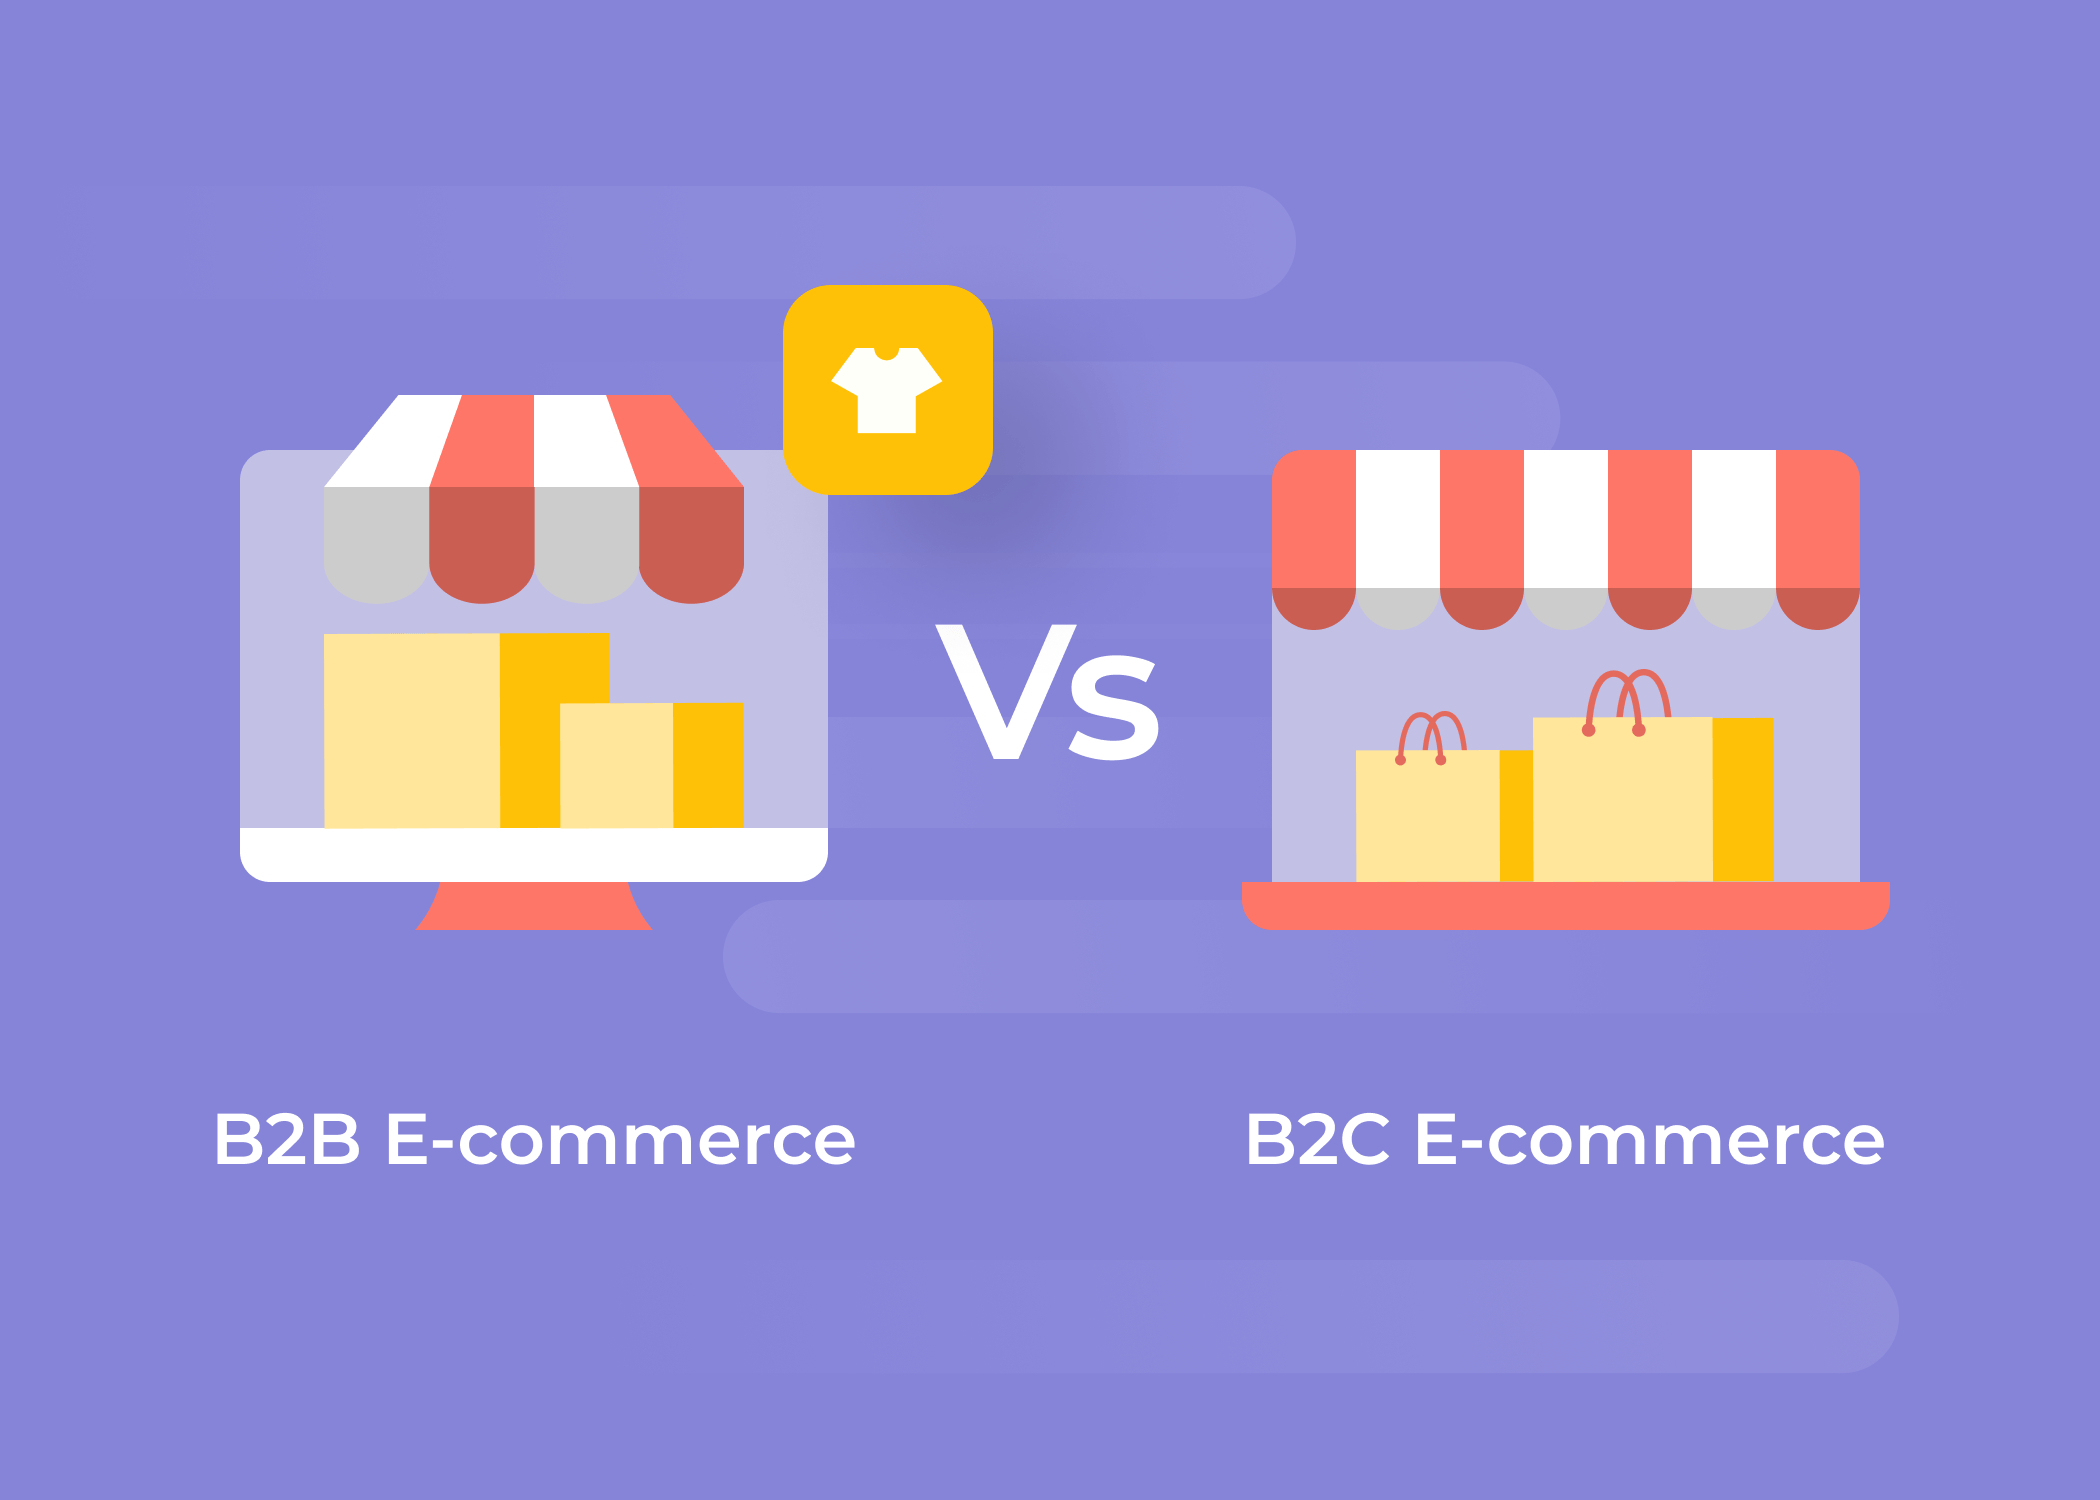 uren uddybe møl What Are the Differences between B2C and B2B E-Commerce? | Dinarys